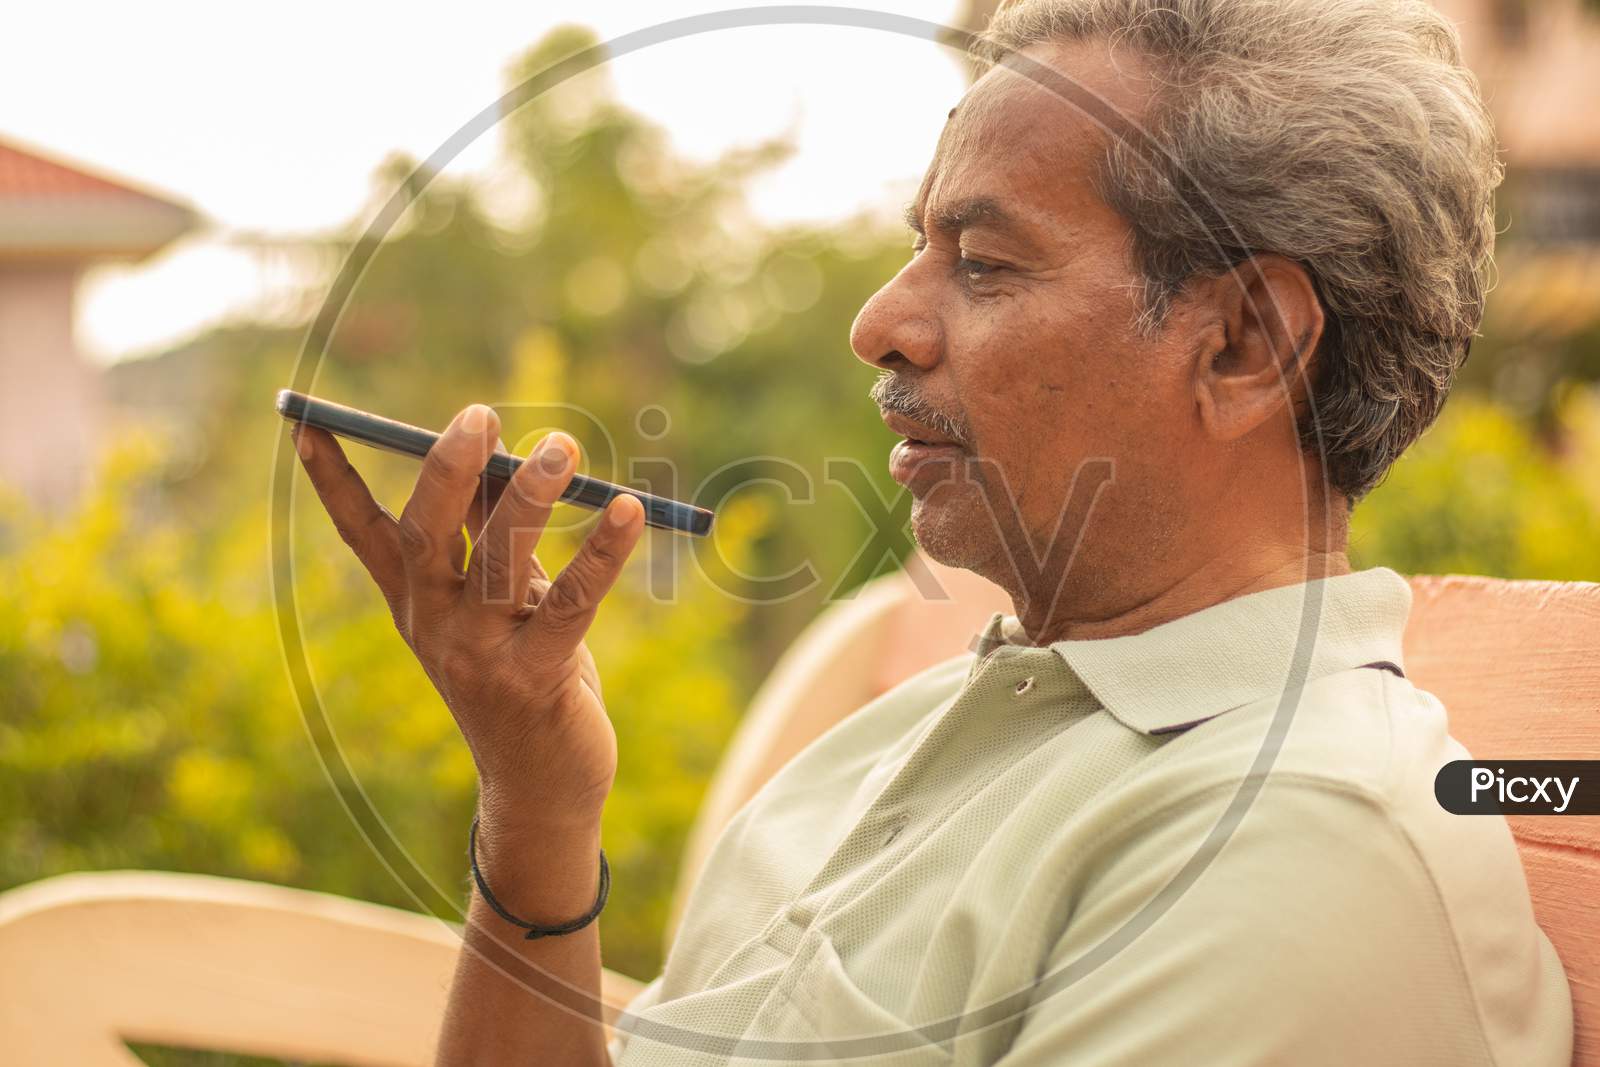 Senior Man Using Virtual Assistant In Phone - Indian Elder Man Using Voice Command On Mobile - Old Man Talking On Smartphone At Outdoor.